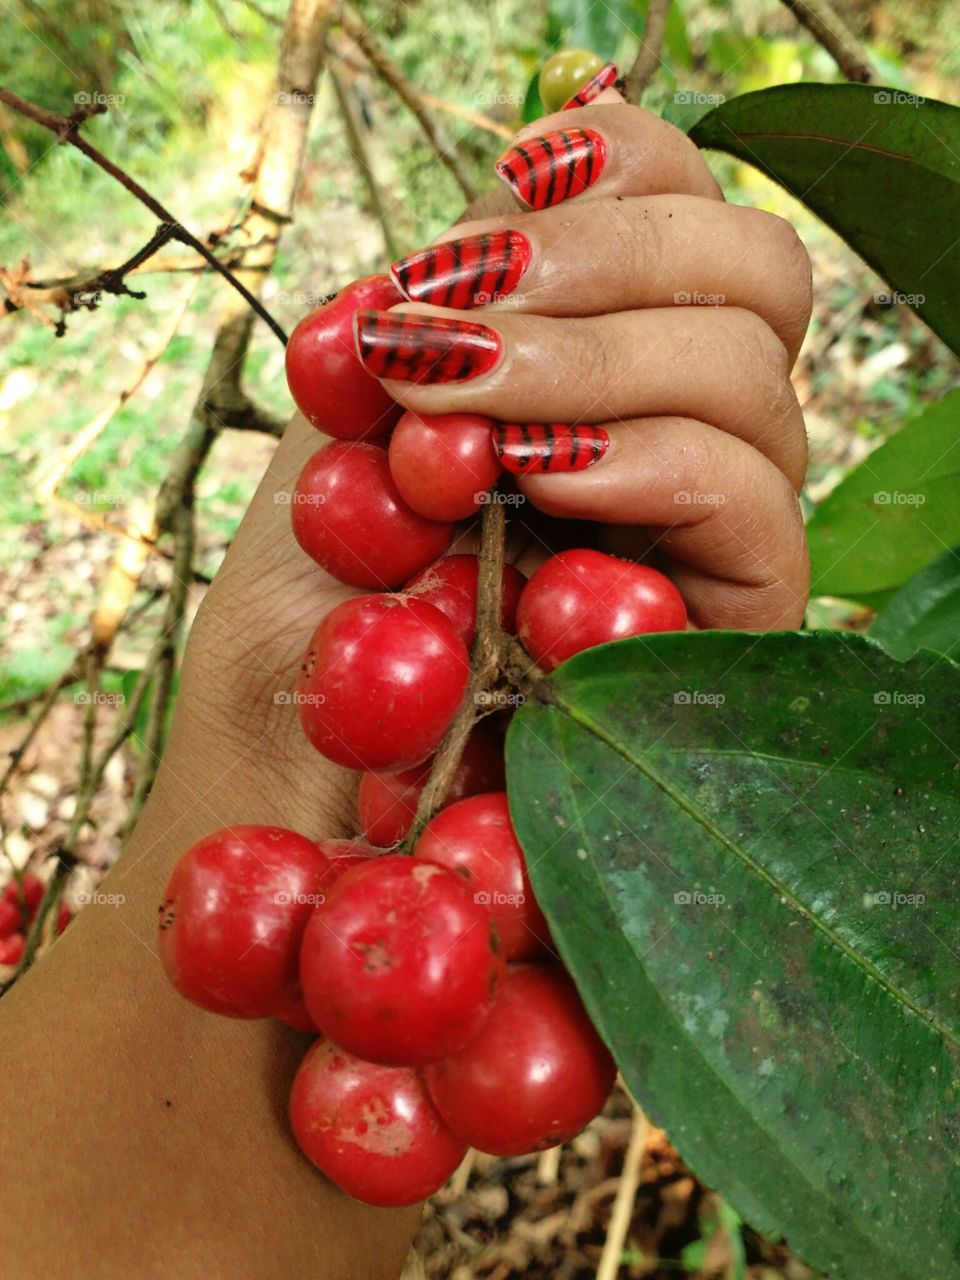 holding red fruits